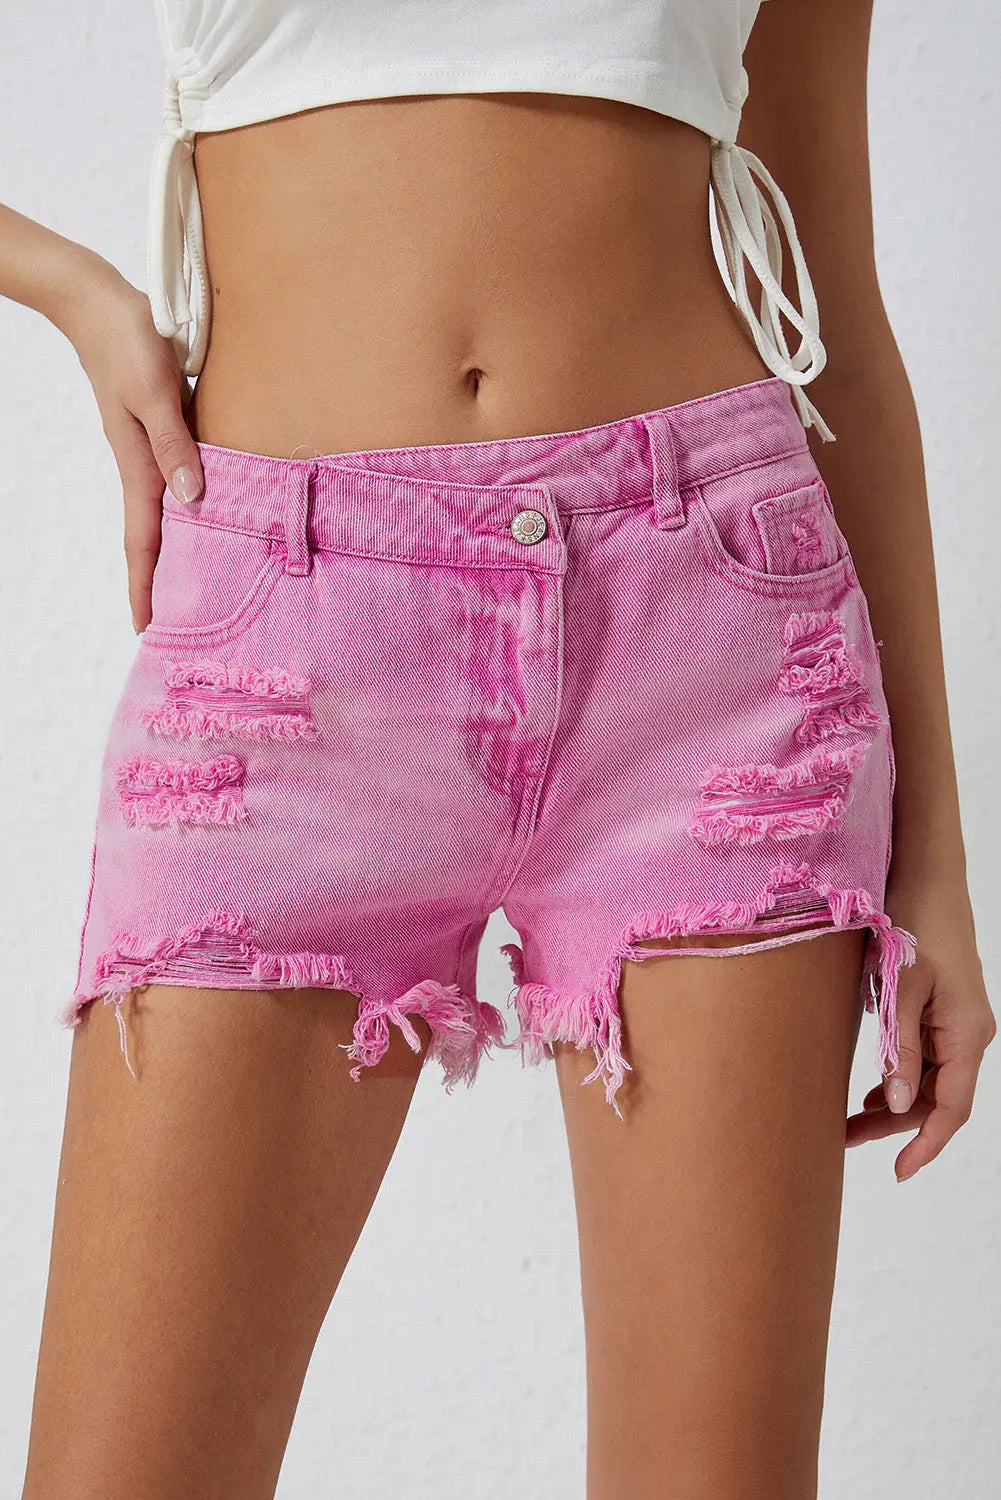 Sky blue high rise crossover waist denim shorts - pink / 4 / 85% cotton + 15% polyester